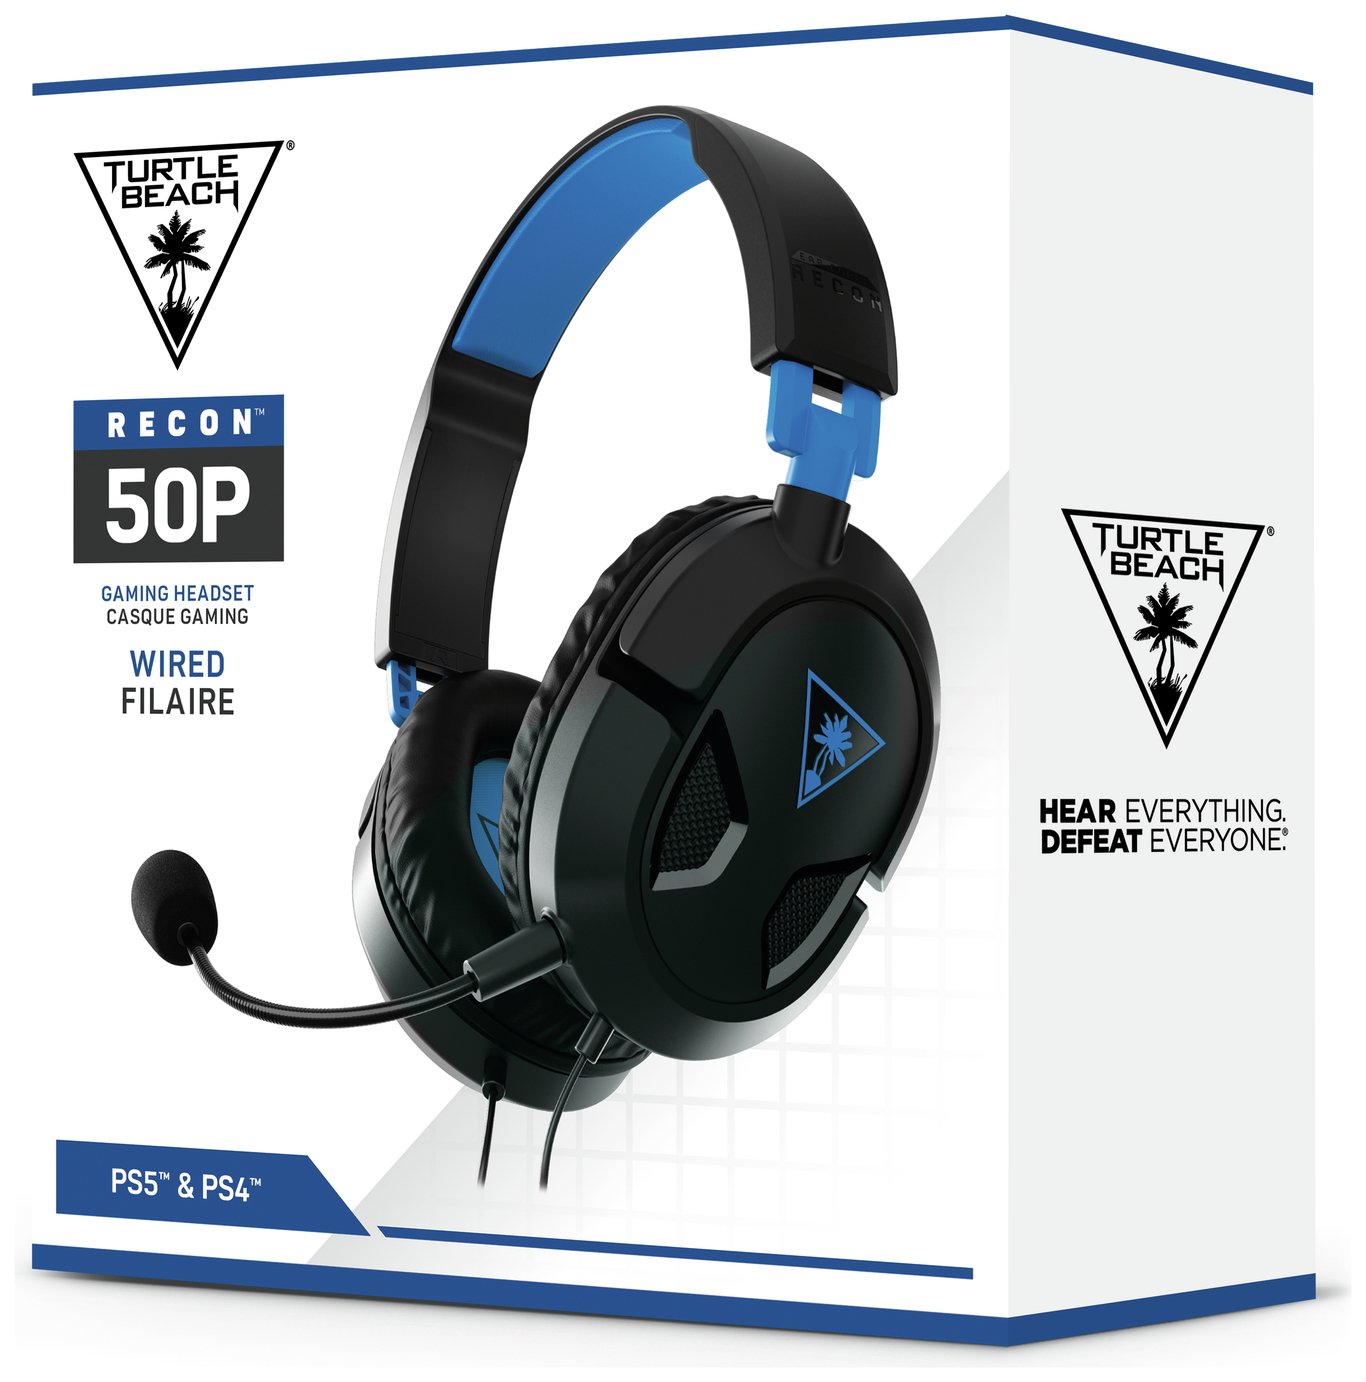 Turtle Beach Recon 50P PS4, Xbox One, PC Headset Reviews